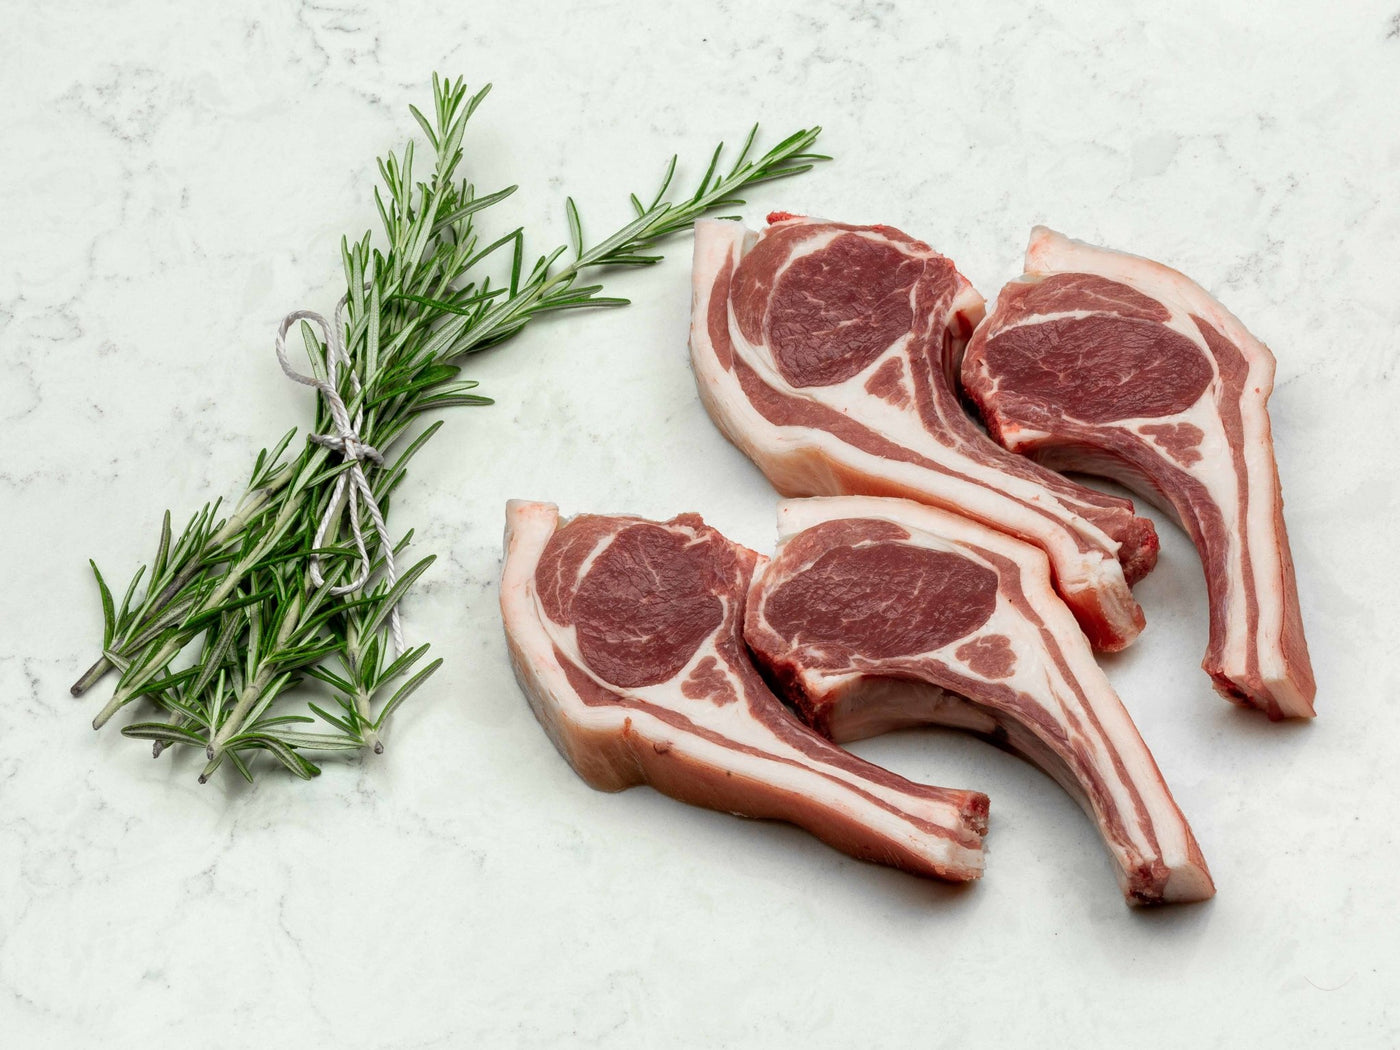 Grass Fed, Dry-Aged Lamb Cutlets - Lamb - Thomas Joseph Butchery - Ethical Dry-Aged Meat The Best Steak UK Thomas Joseph Butchery